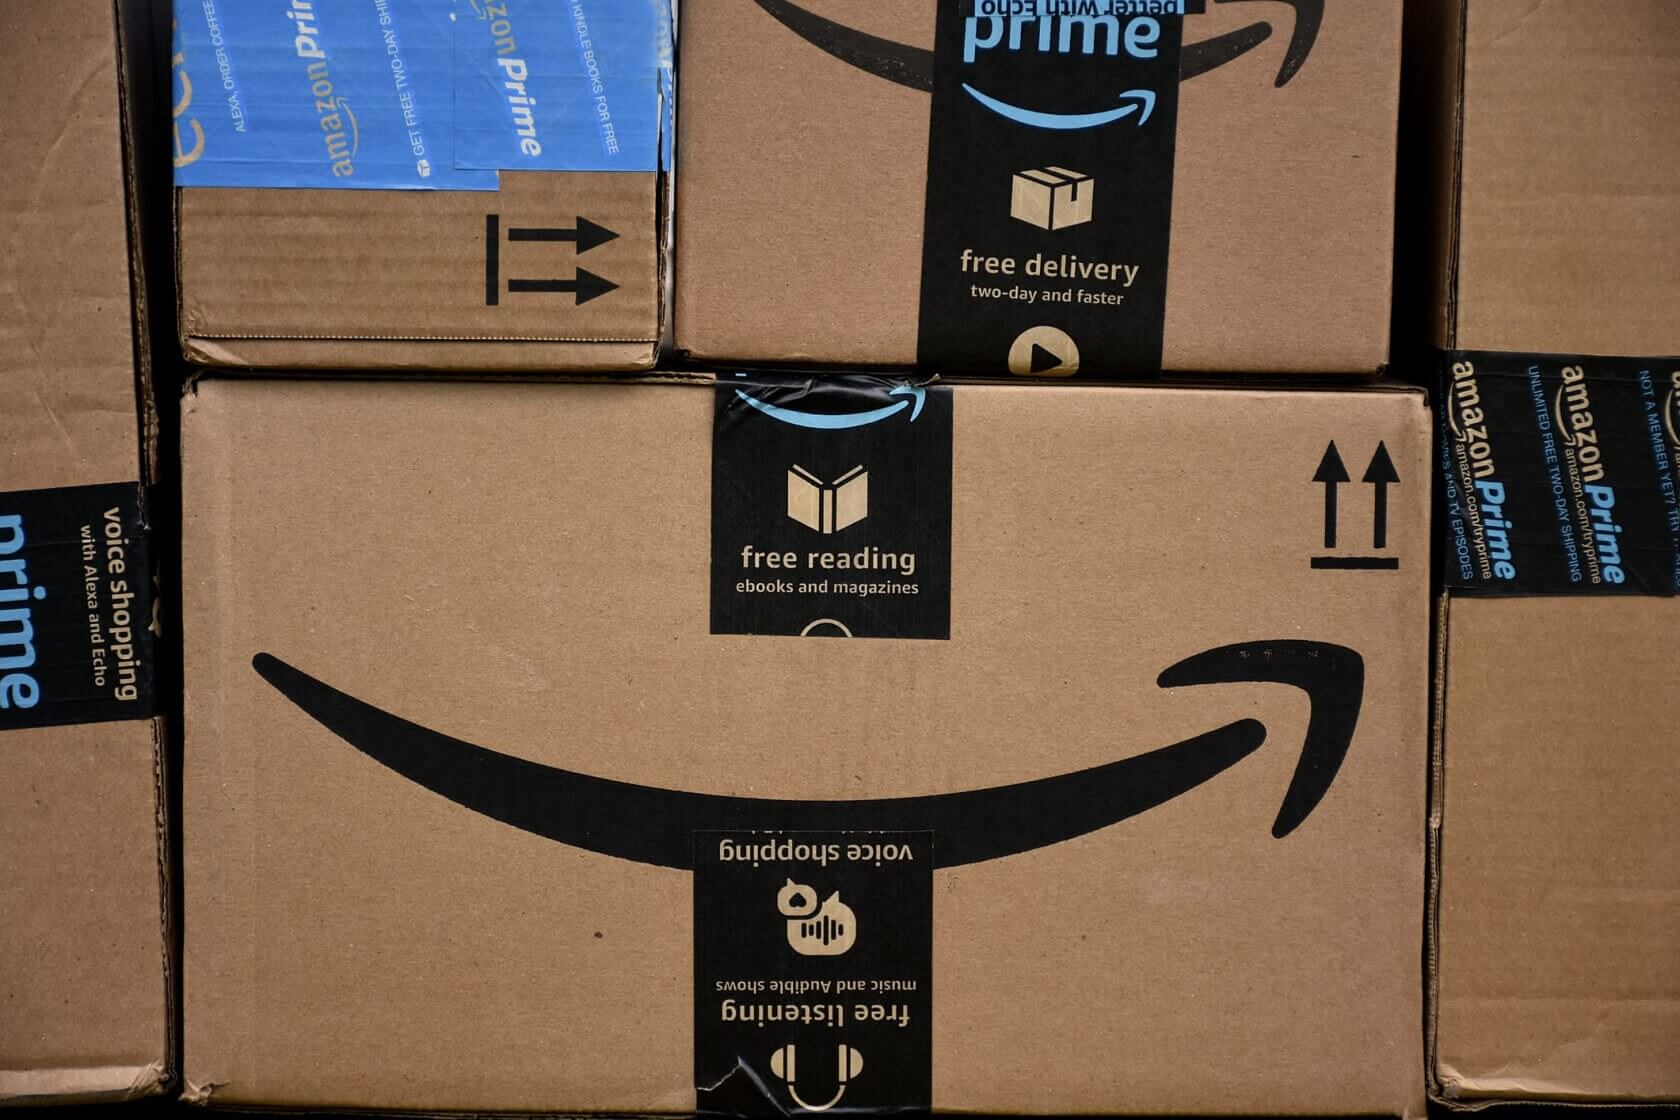 is it safe to buy from amazon third party sellers?